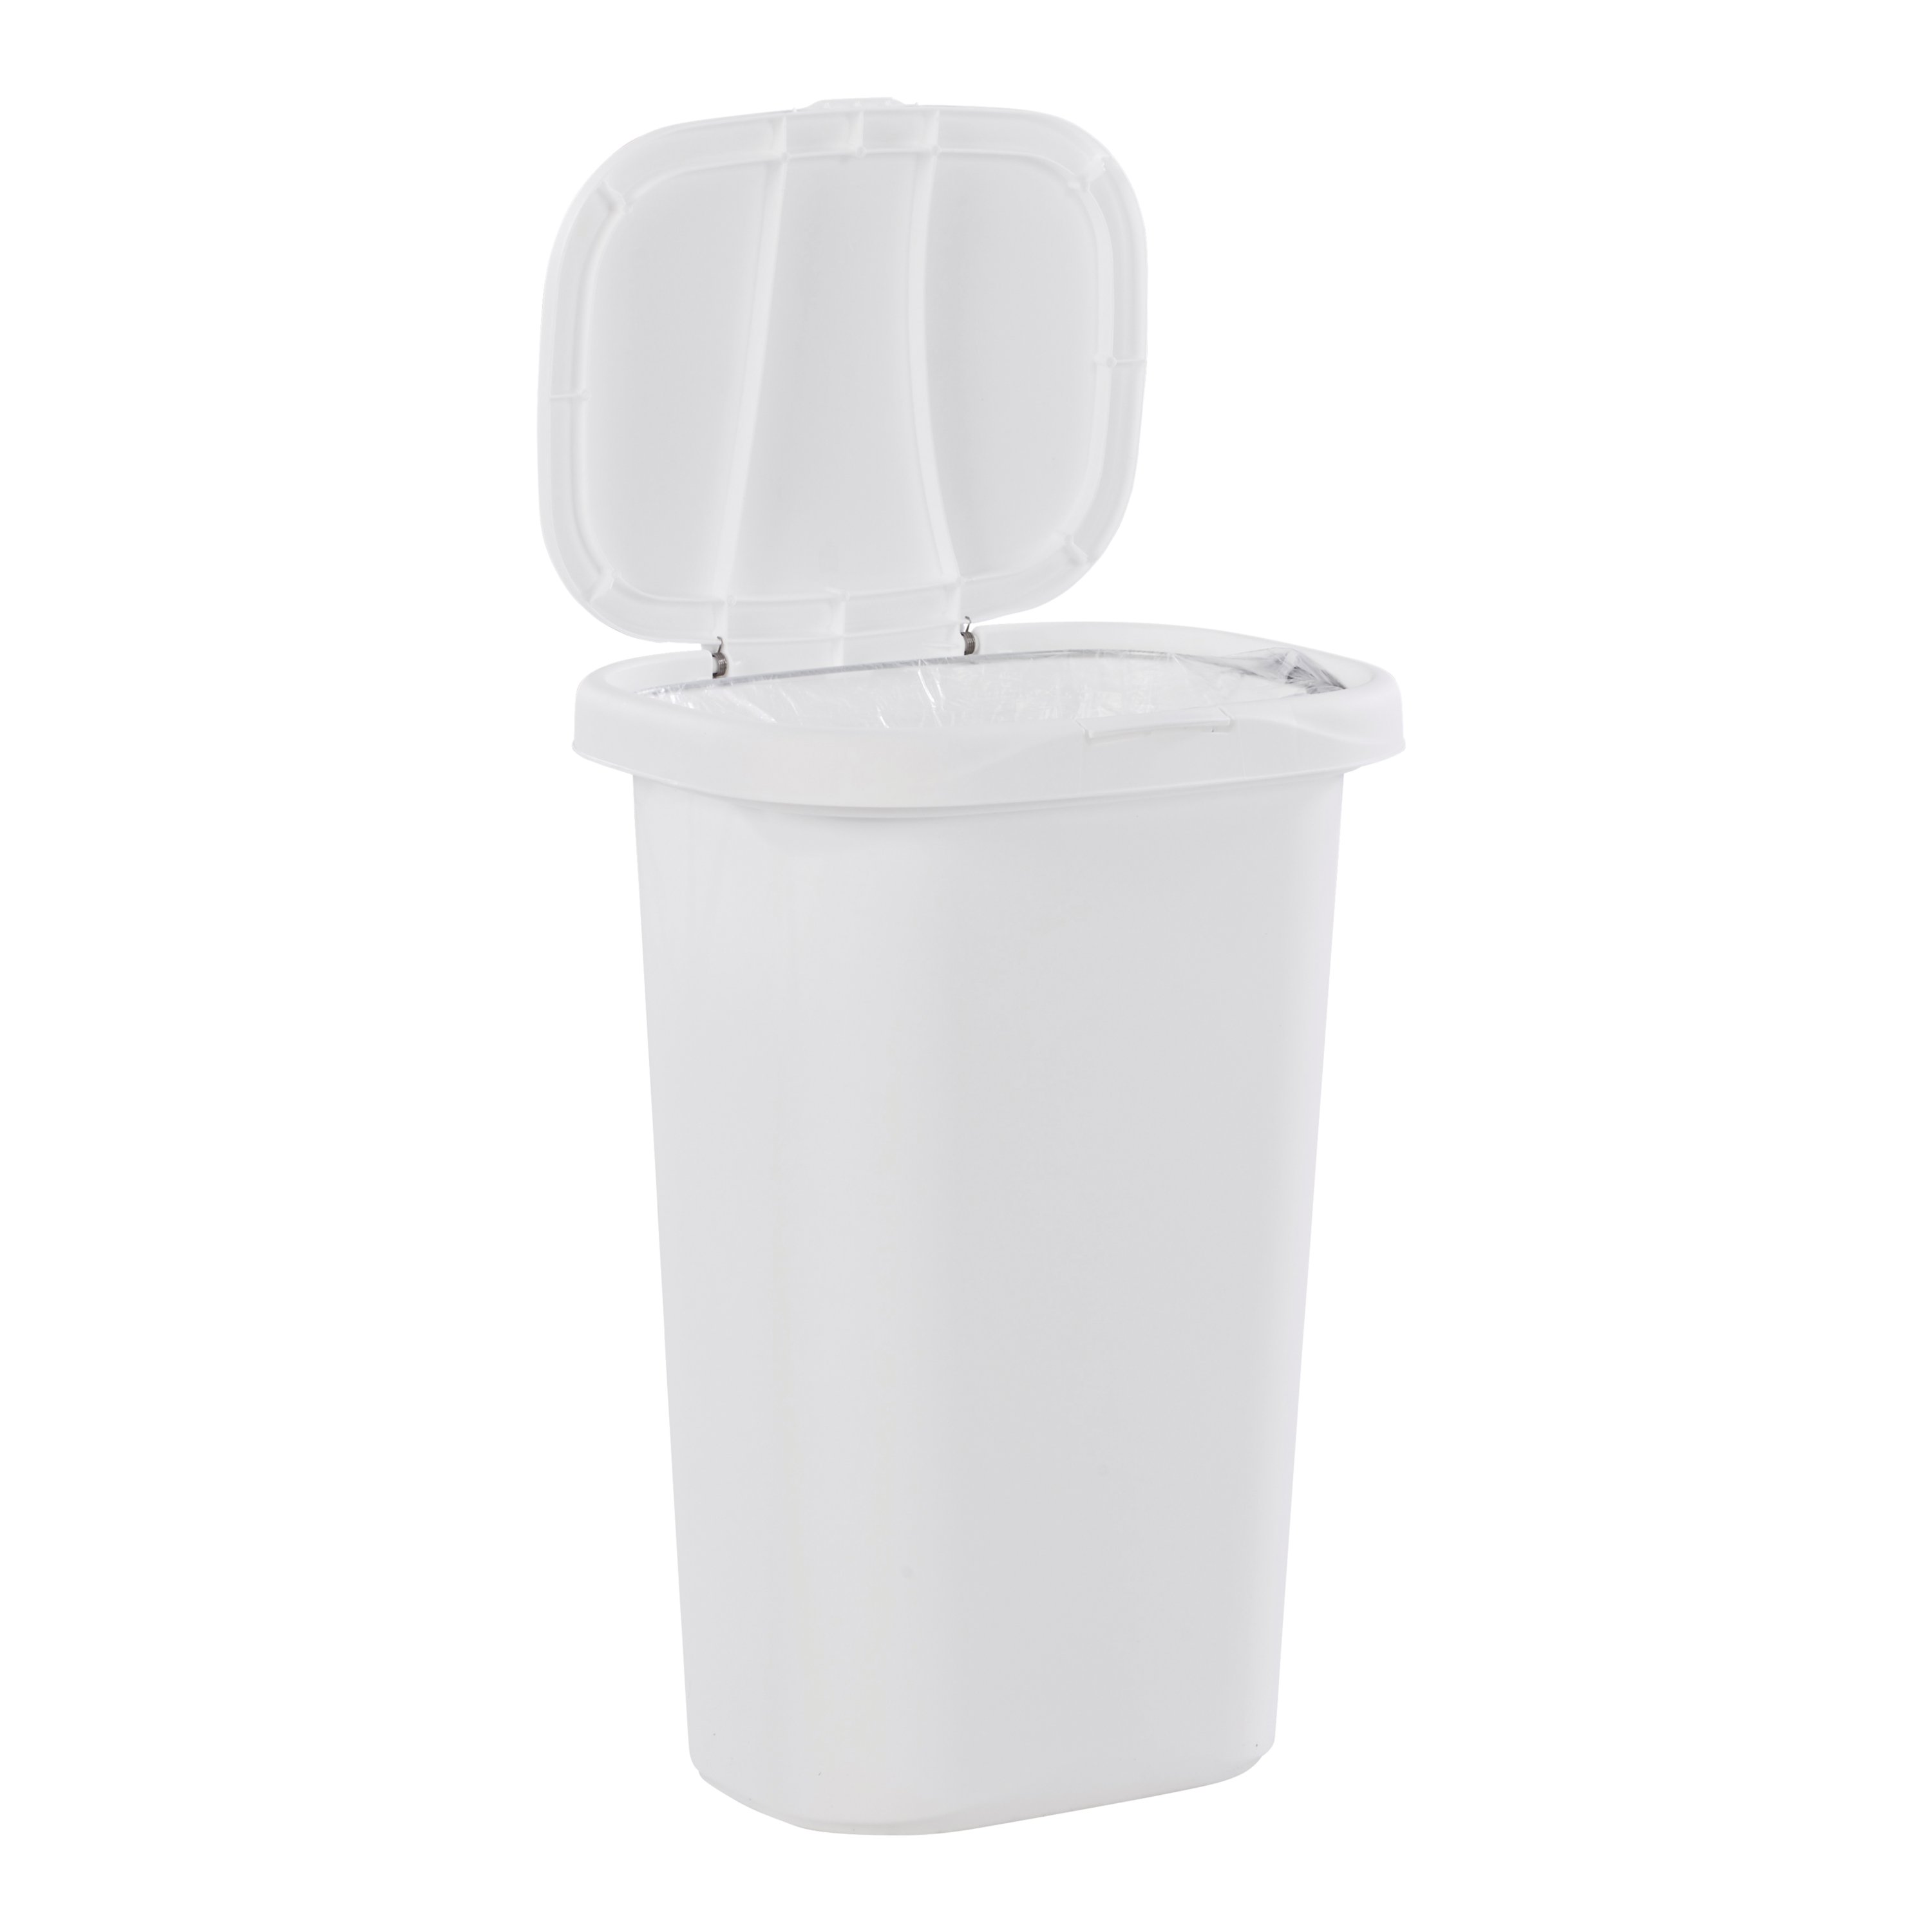  Rubbermaid 13.25 Gallon Rectangular Spring-Top Lid Kitchen Wastebasket  Trash Can for Tall Trashbags, White (2 Pack) : Industrial & Scientific